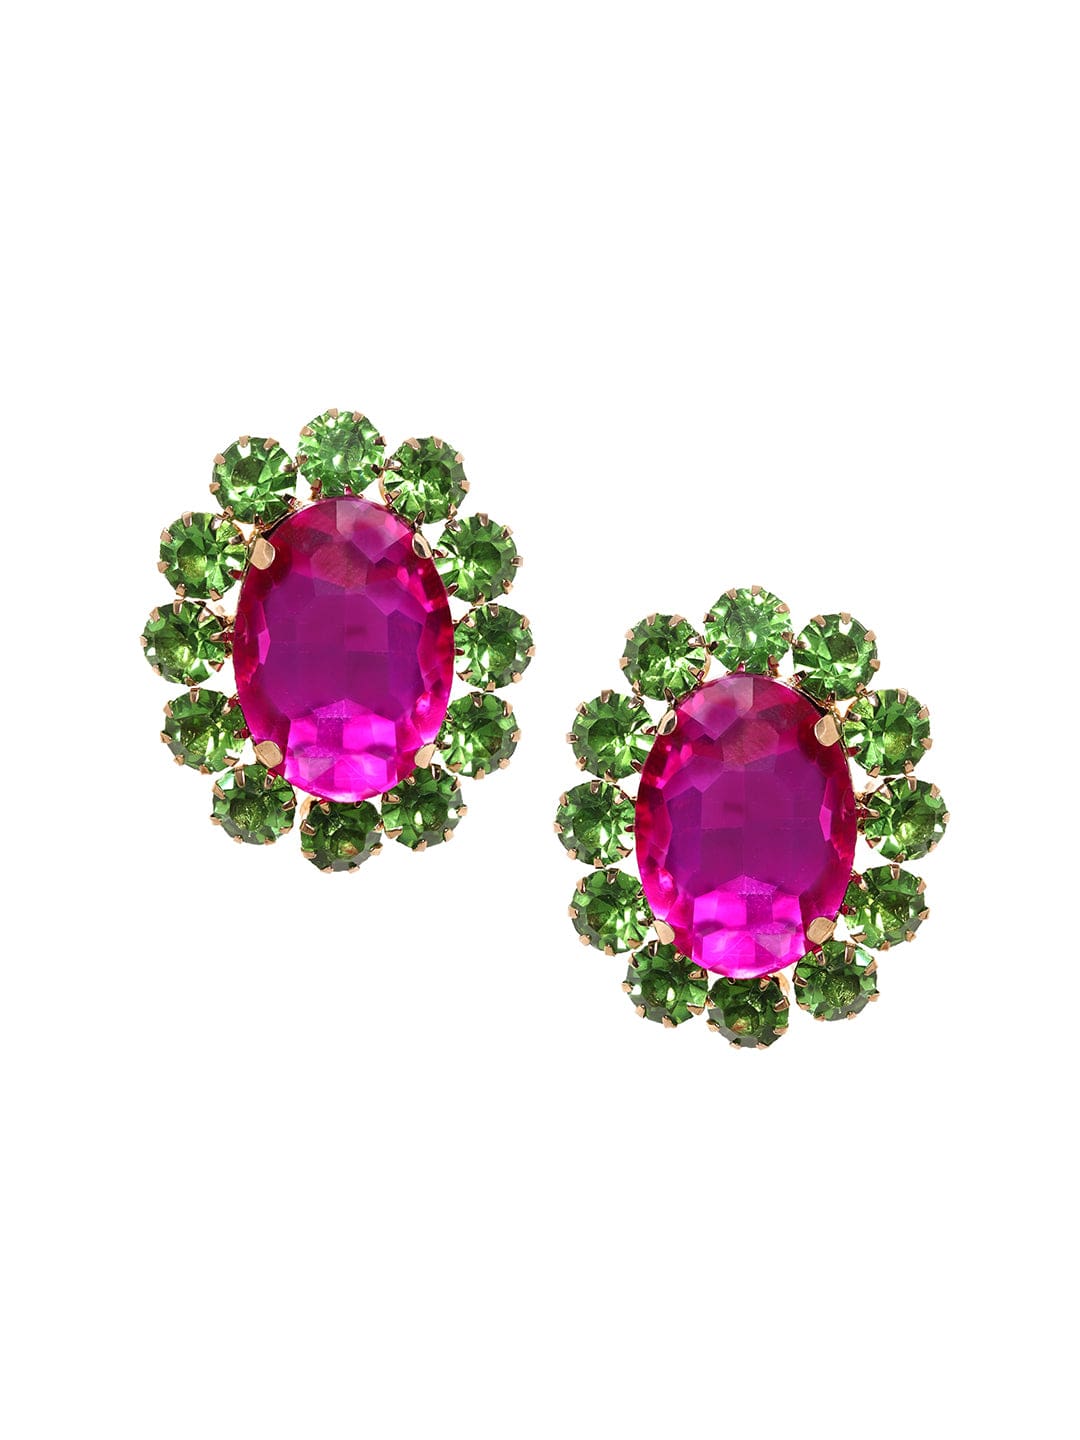 Rubans Voguish Enchanting Blossoms: Pink and Green AD Stud Earrings Earrings